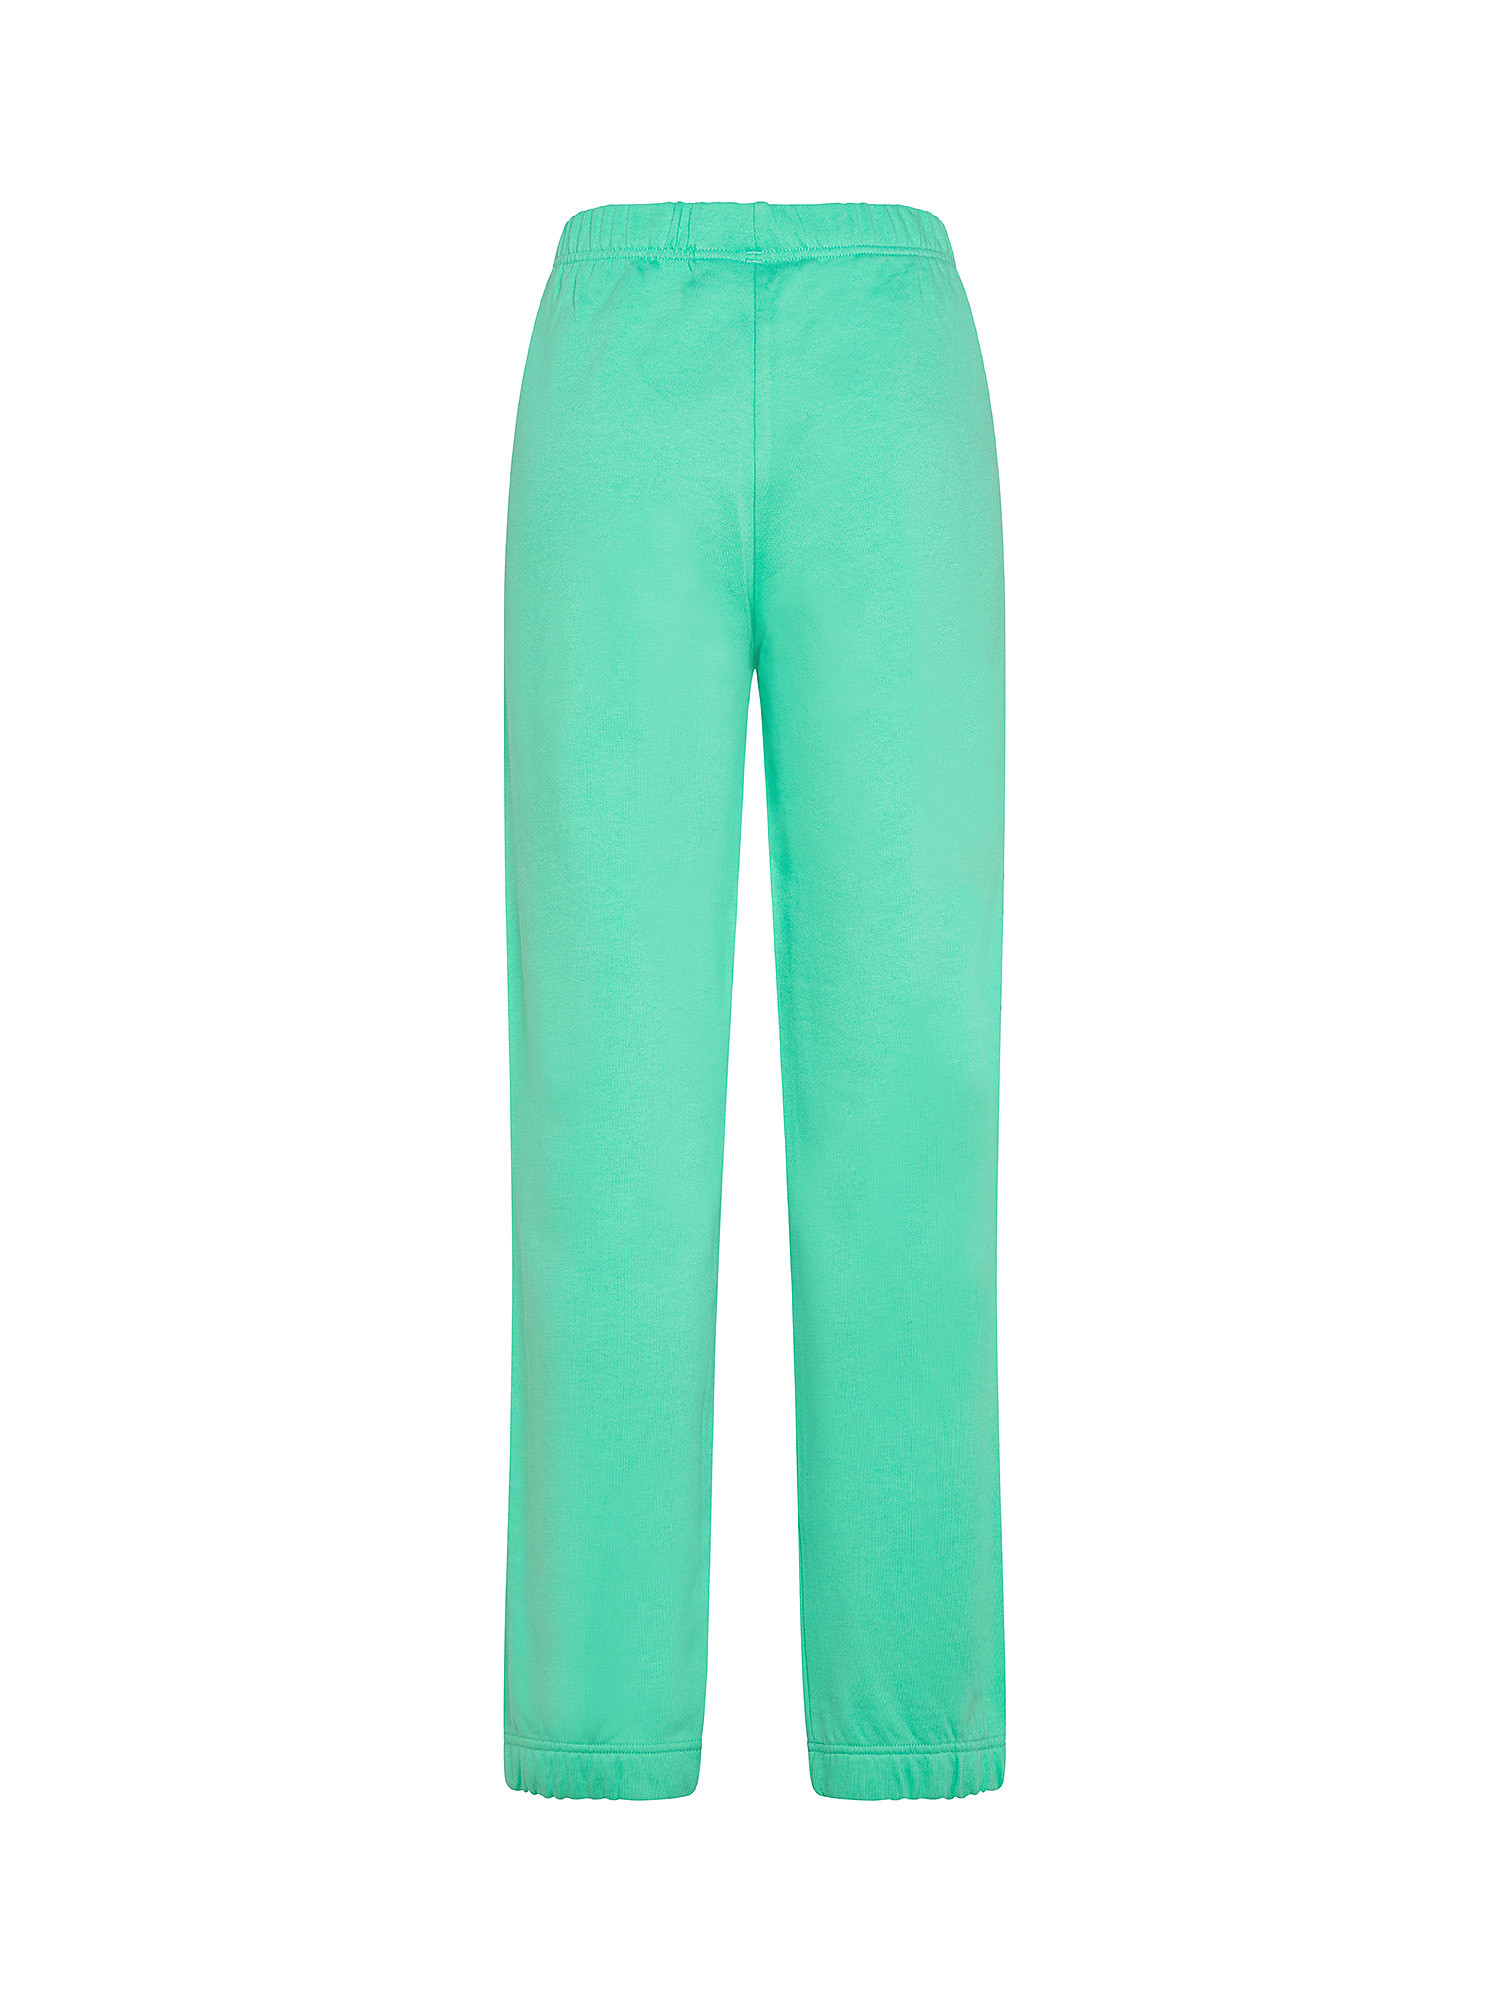 Logo Tape trousers, Teal, large image number 1